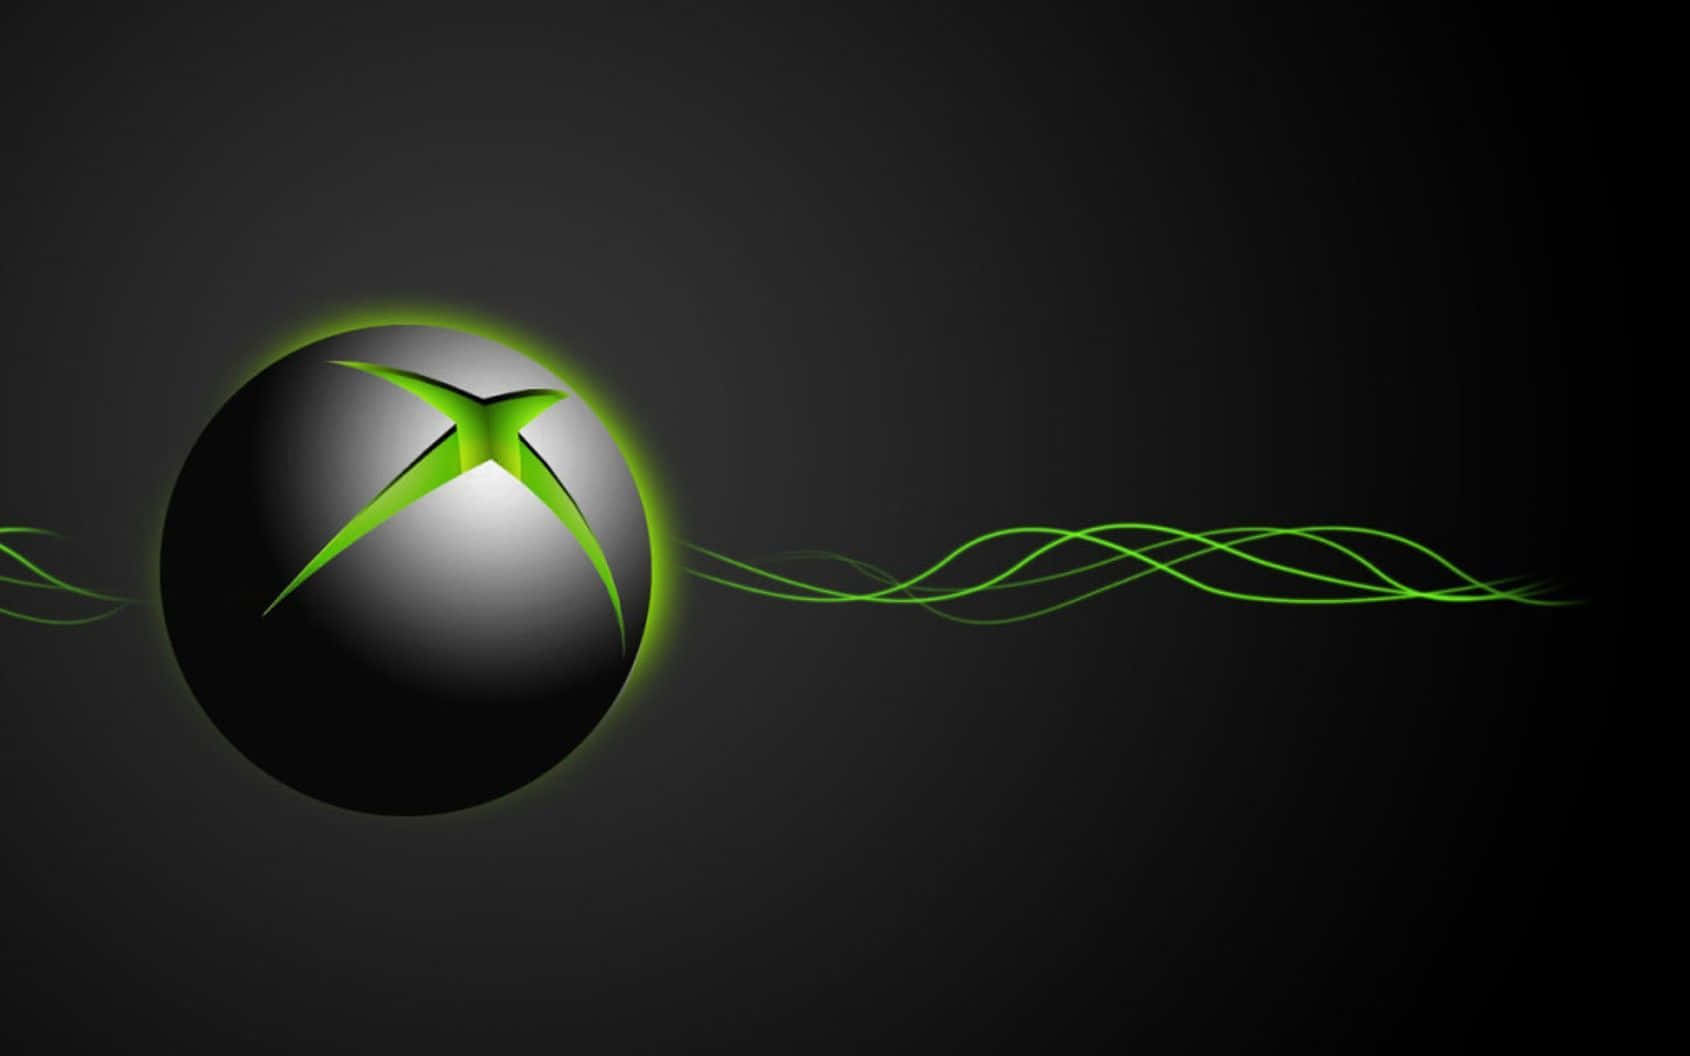 Play your favorite games on your Xbox like never before